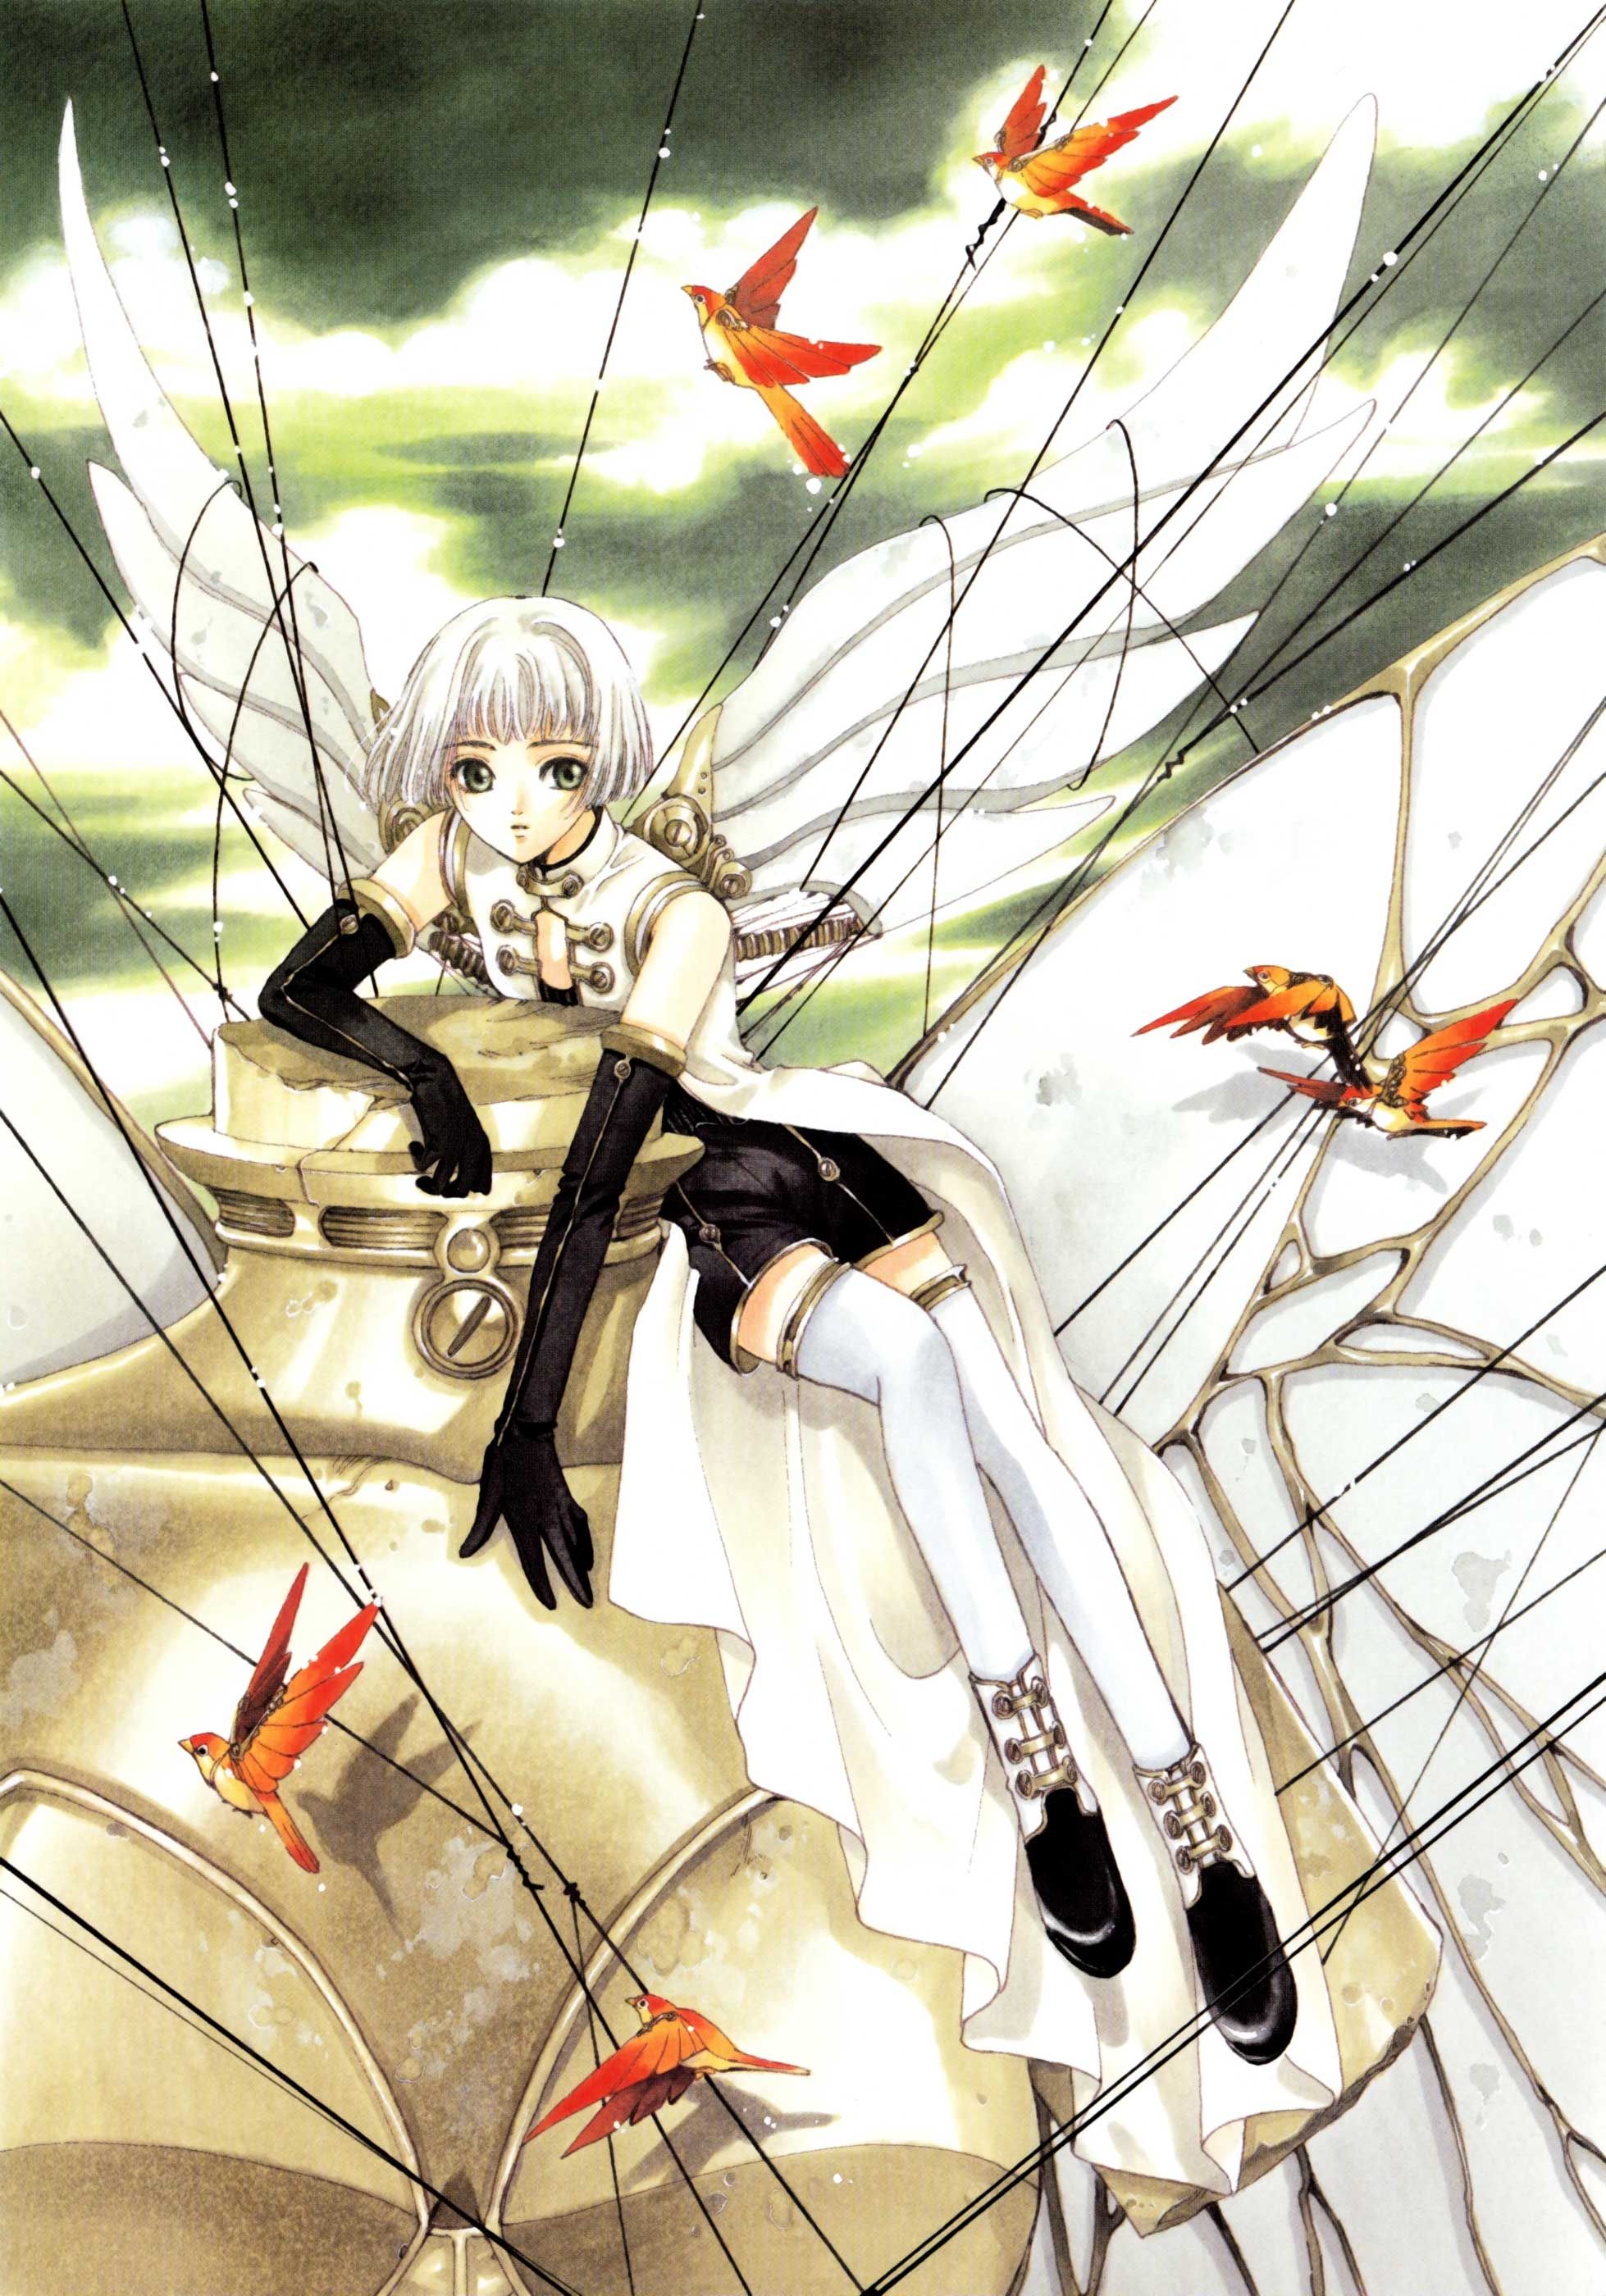 Suu Relaxes With Wings and Birds In Clover Illustration By Clamp